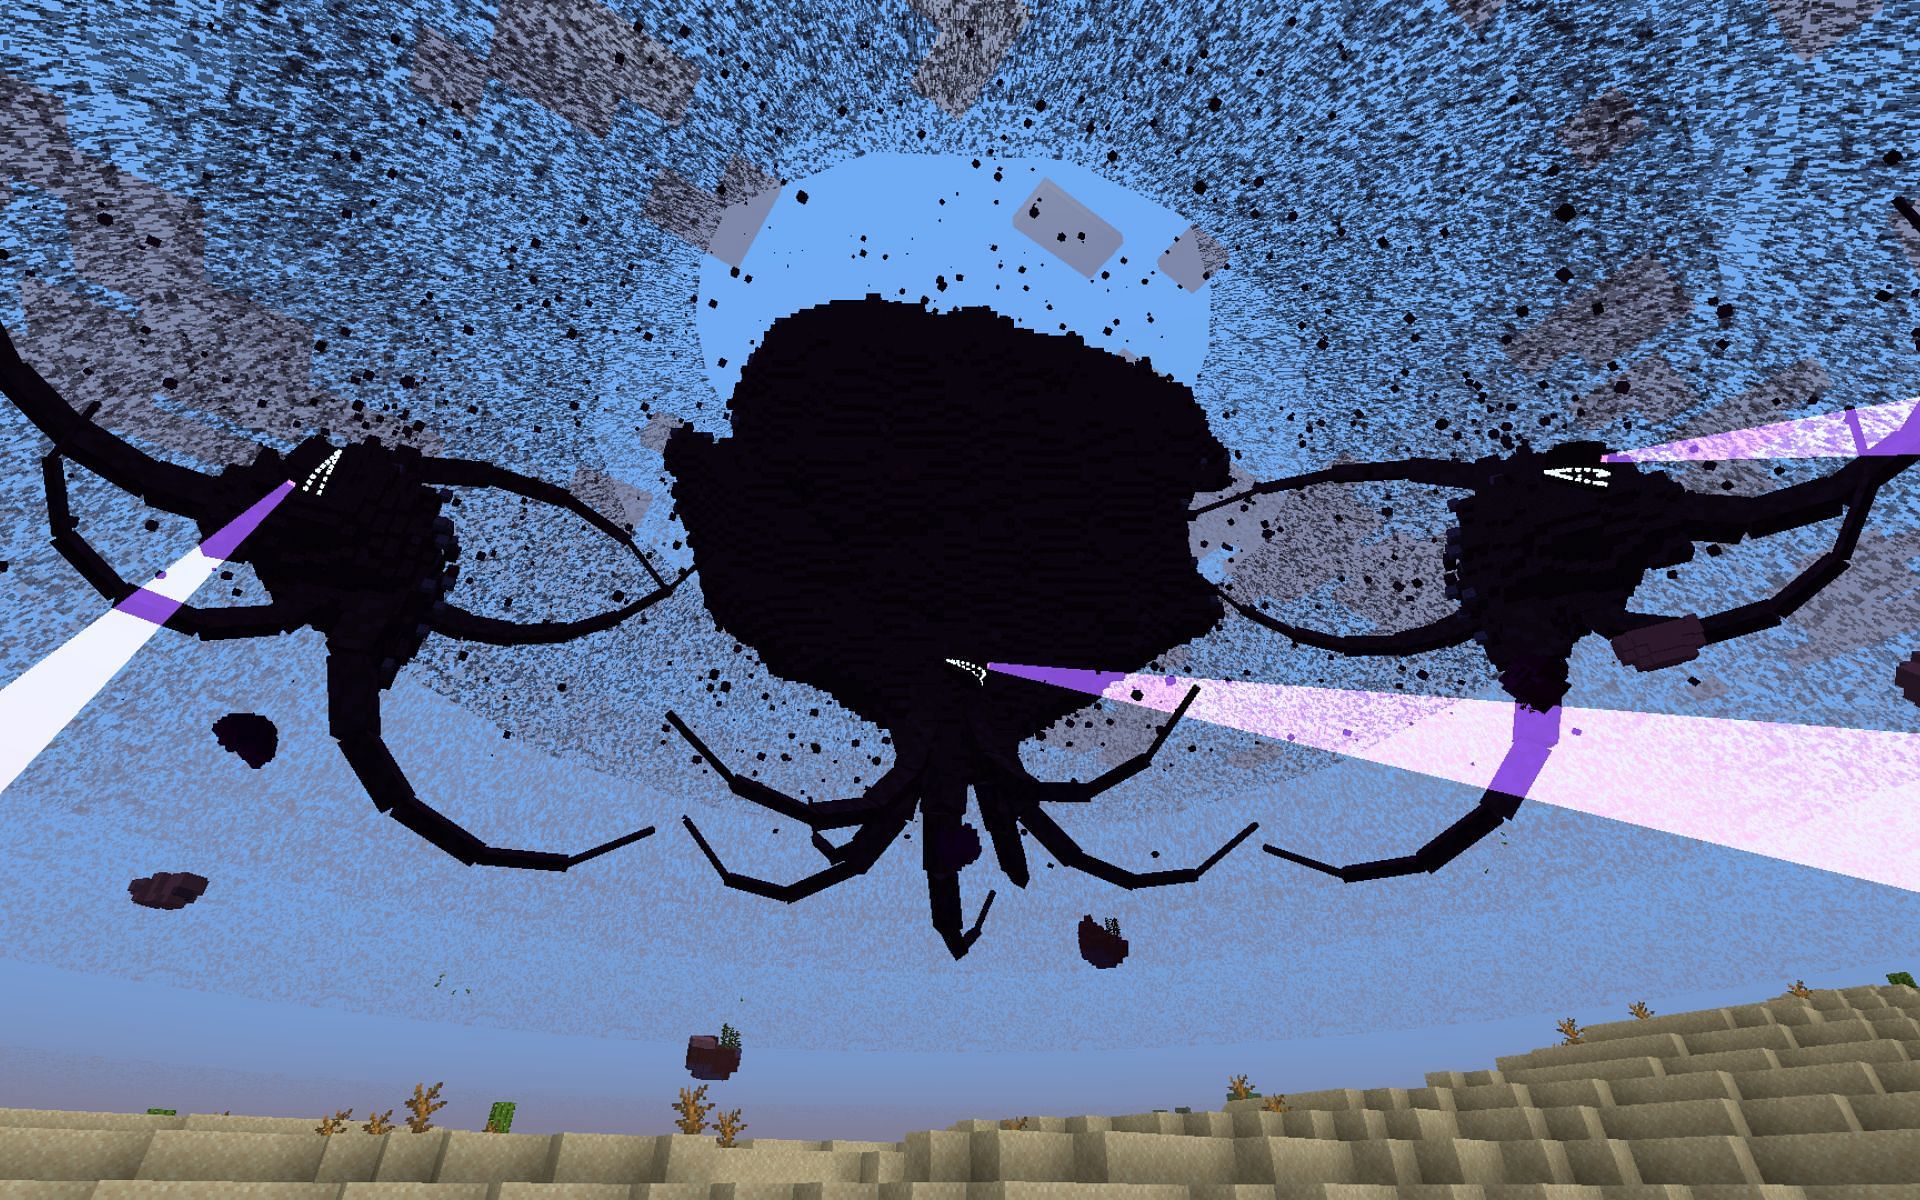 Wither Storm Mod for Minecraft - APK Download for Android